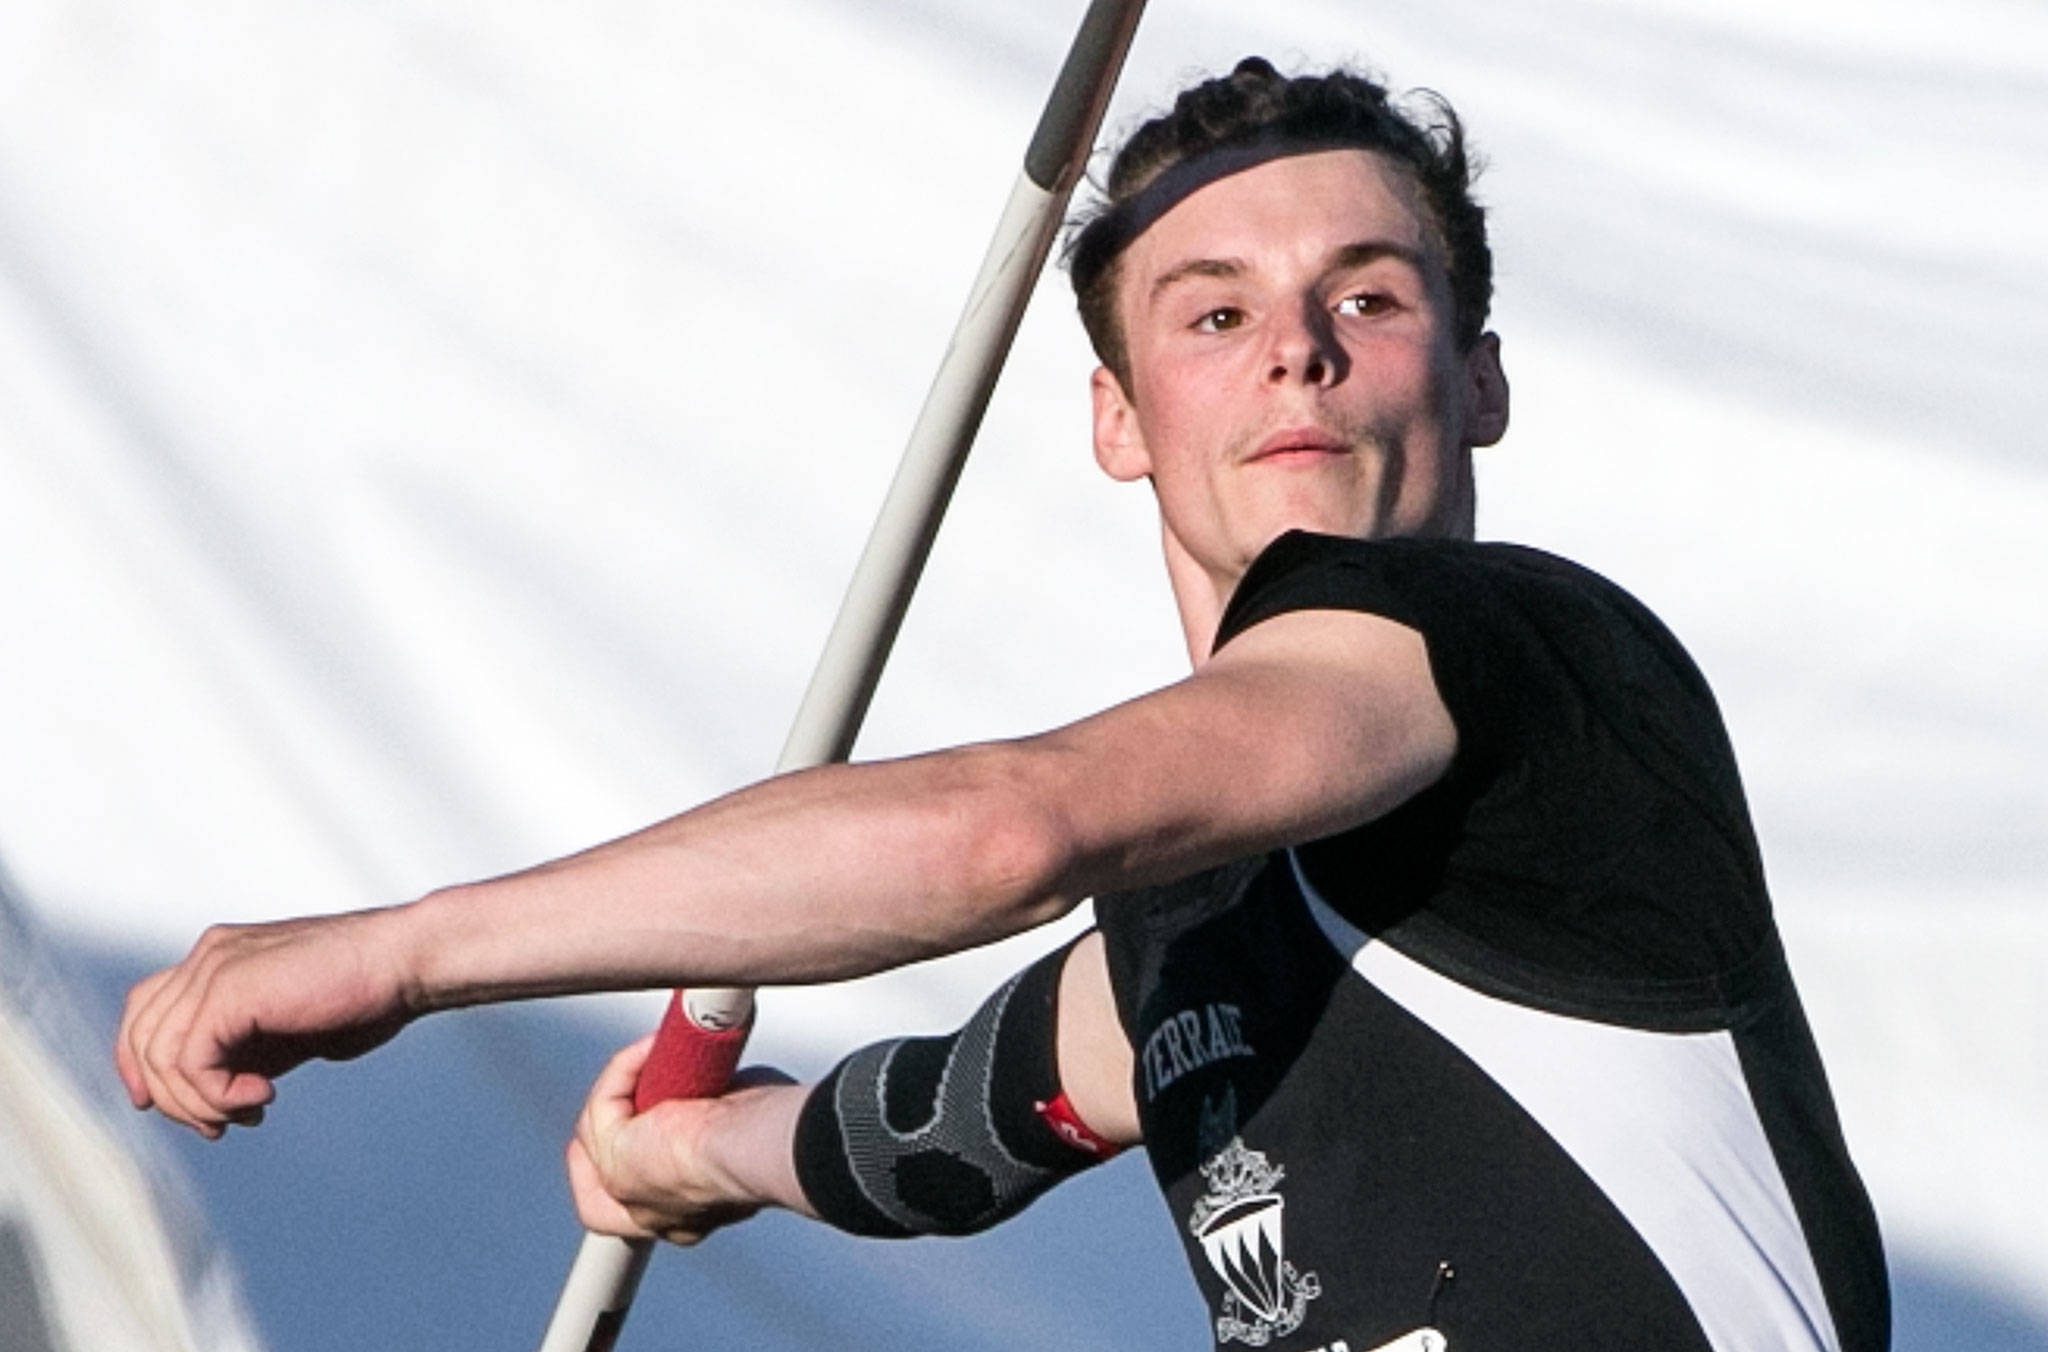 Mountlake Terrace’s Brandon Bach competes in the javelin event Thursday at the WIAA track and field state championships at Mount Tahoma High School in Tacoma. (Kevin Clark / The Herald)